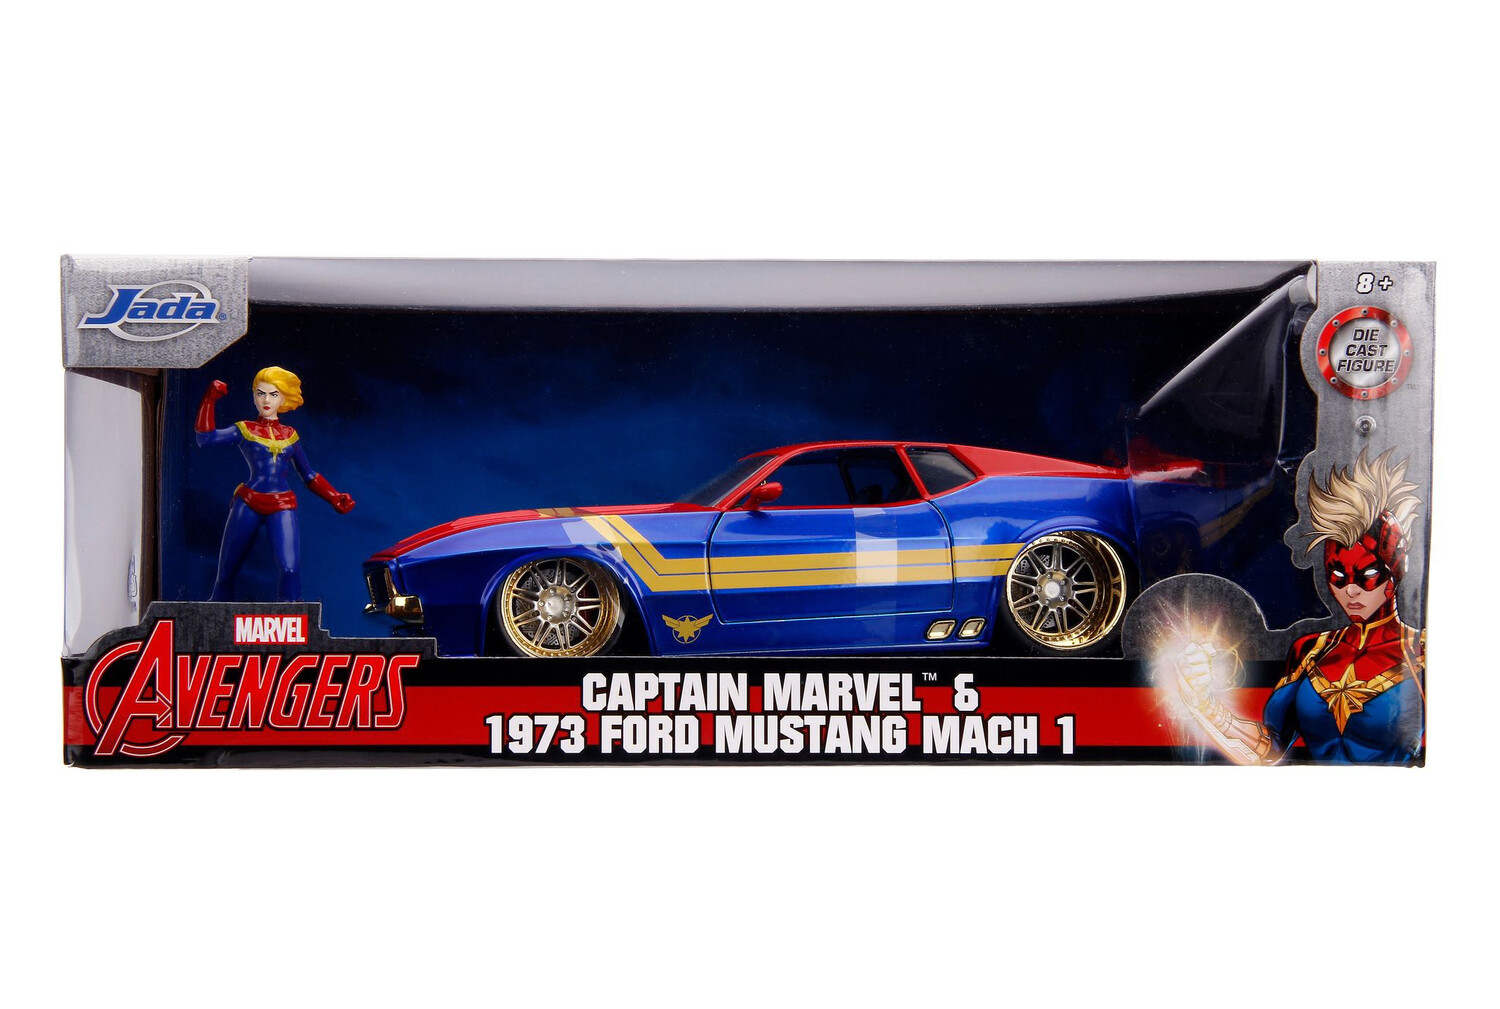 1973 Ford Mustang Mach 1 Capitan Marvel